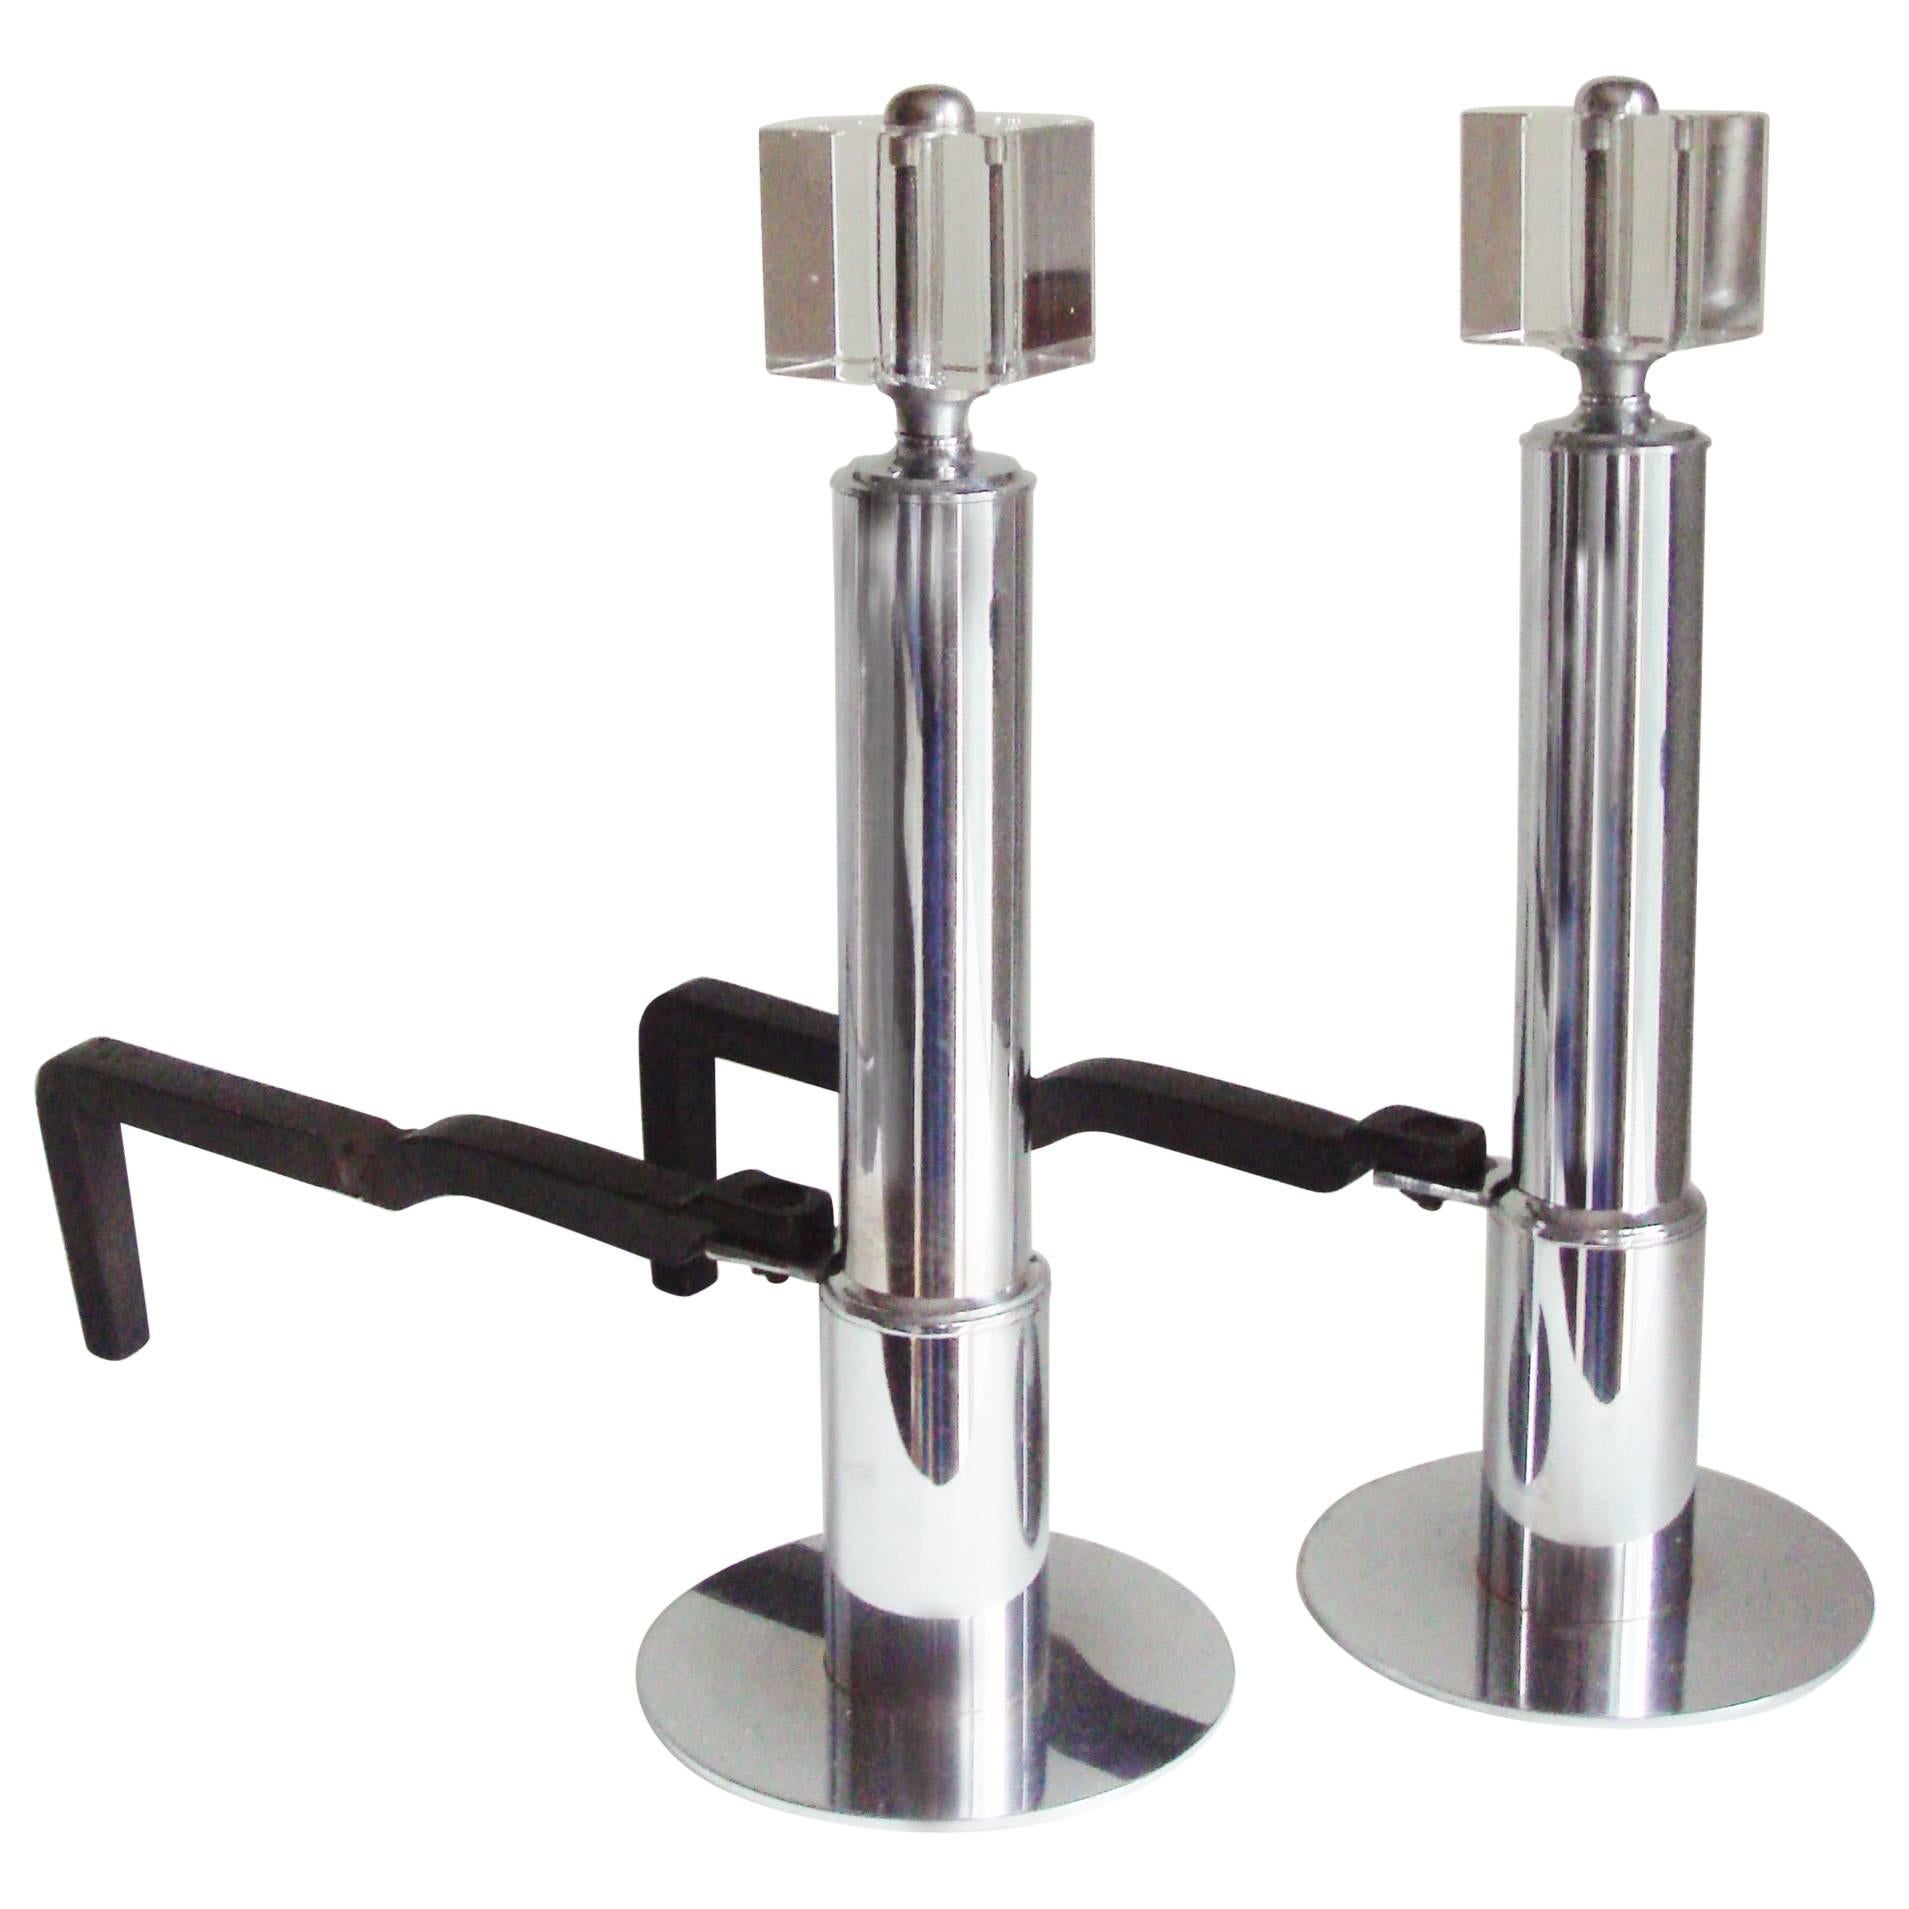 Pair of American Art Deco Chrome, Glass and Forged Iron Geometric Andirons